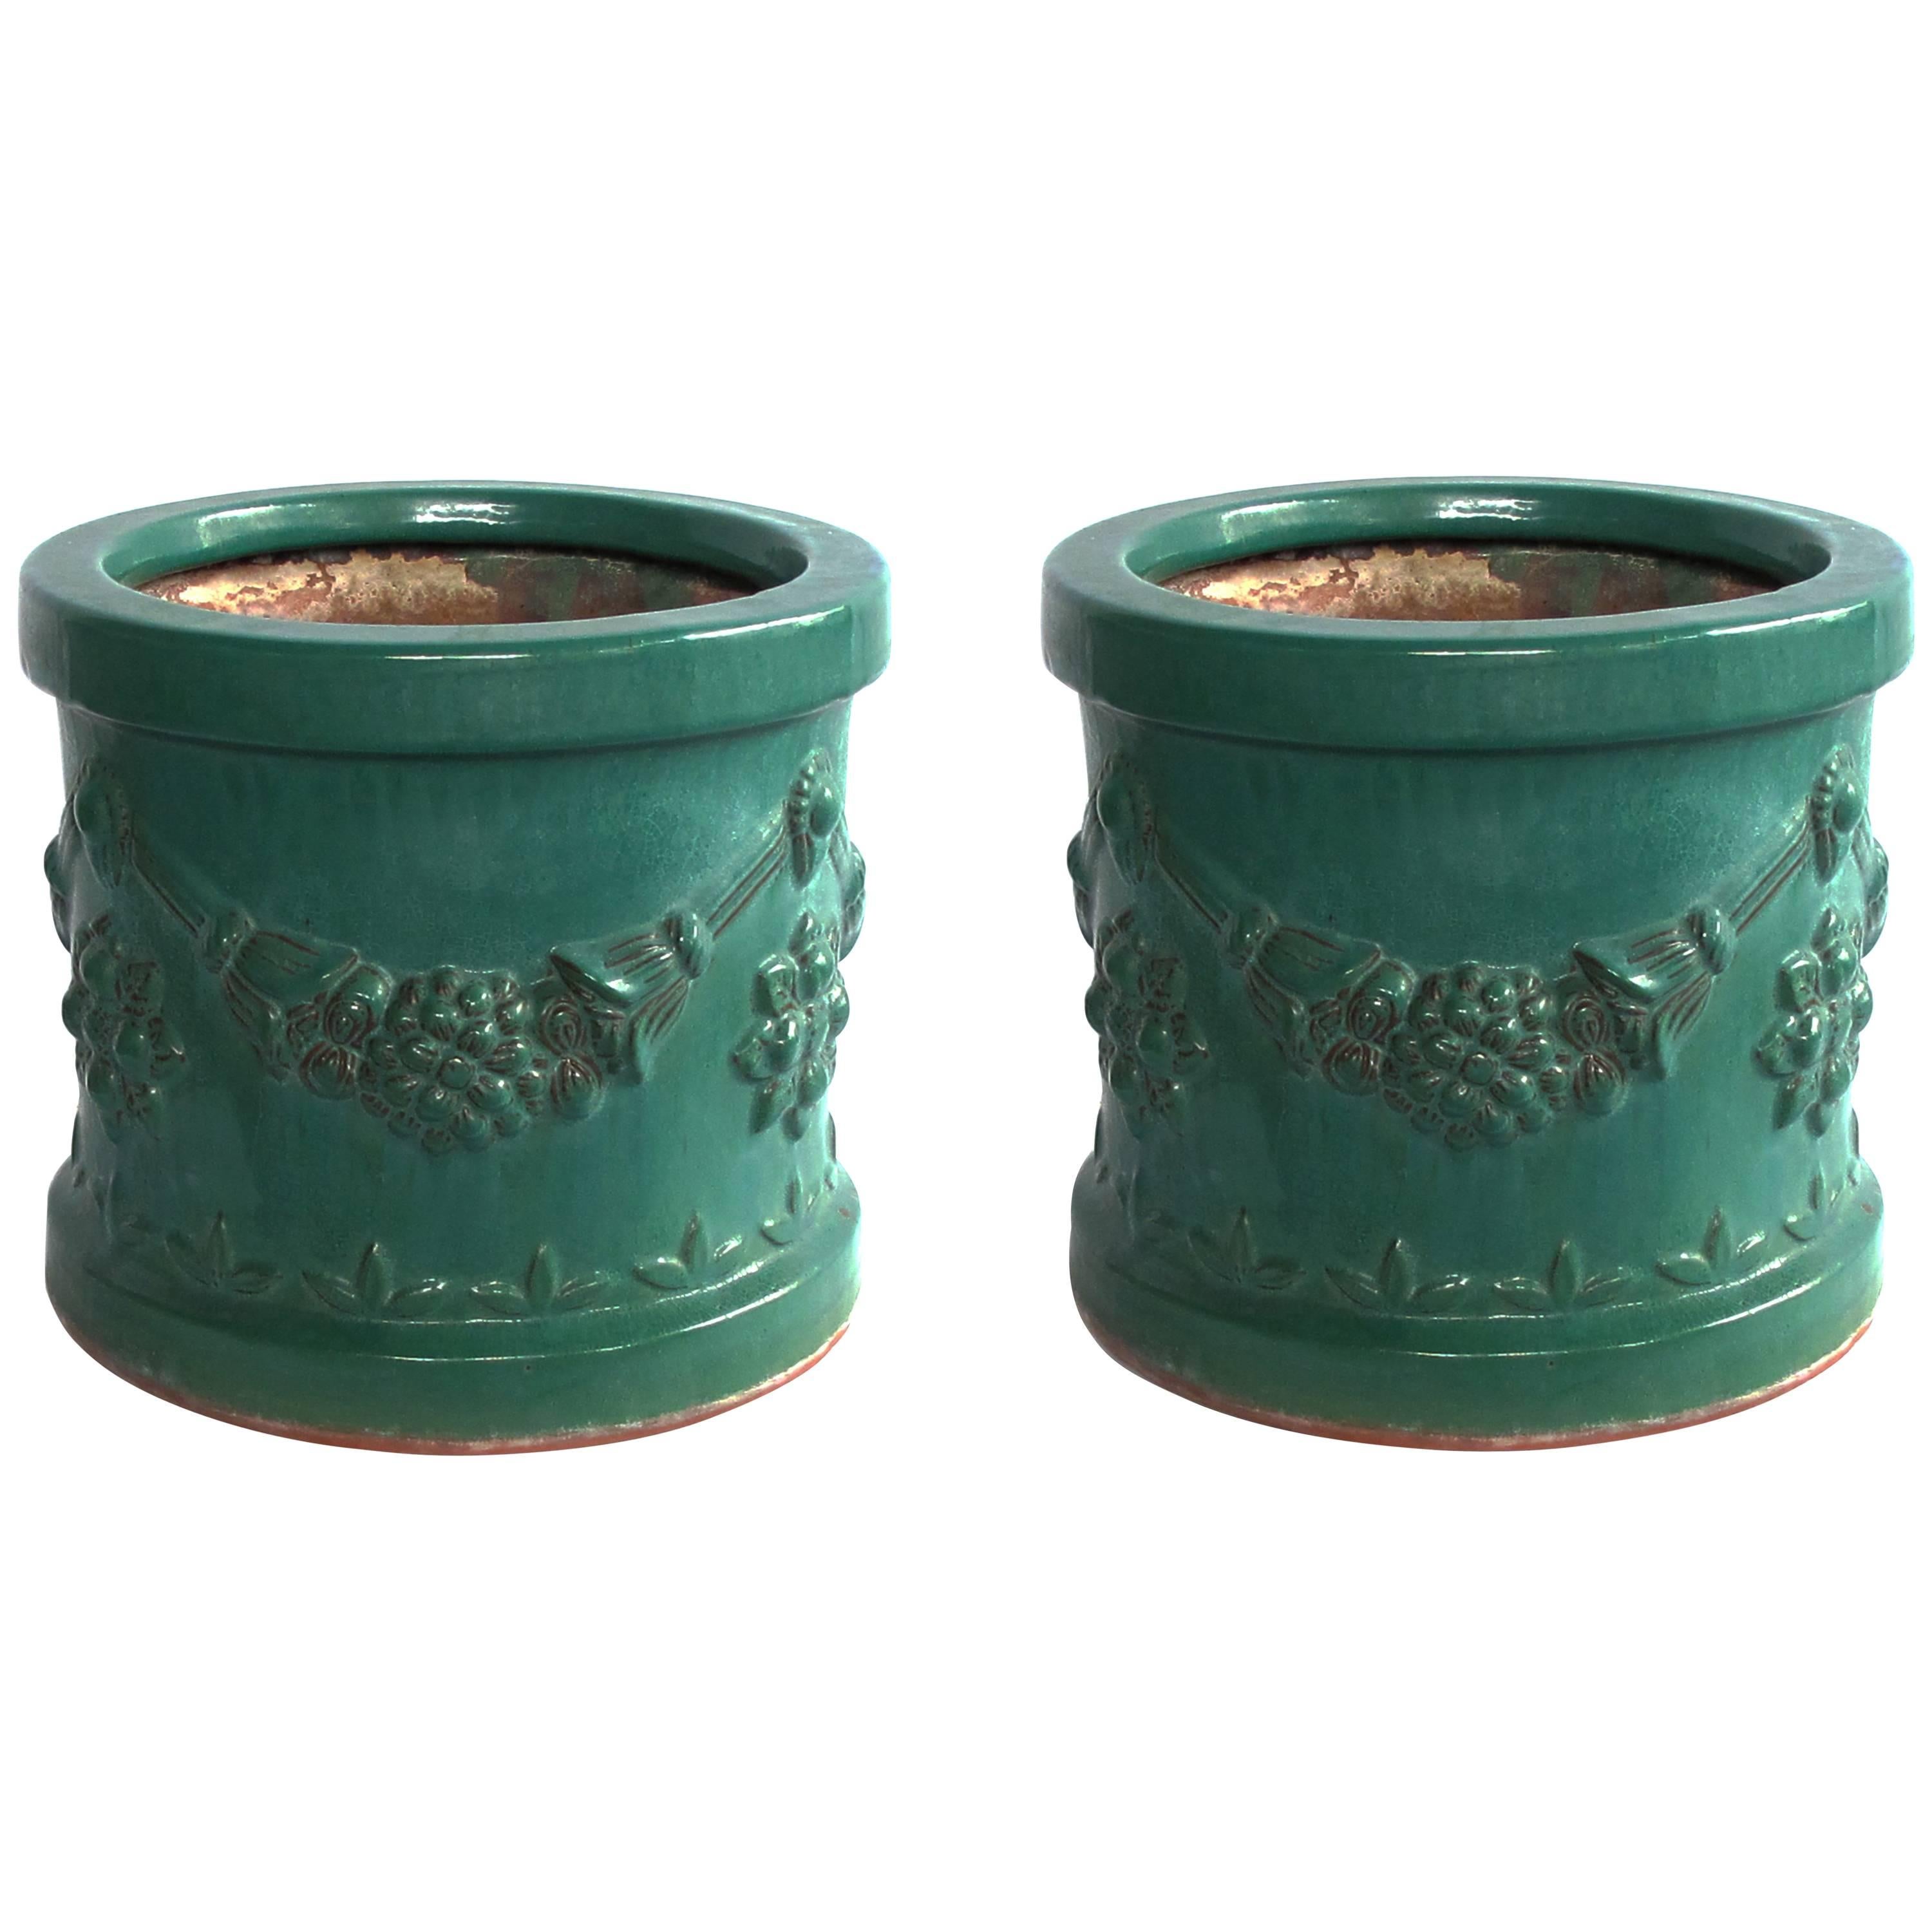 Robust Pair of Malaysian Teal-Glazed Terracotta Planters